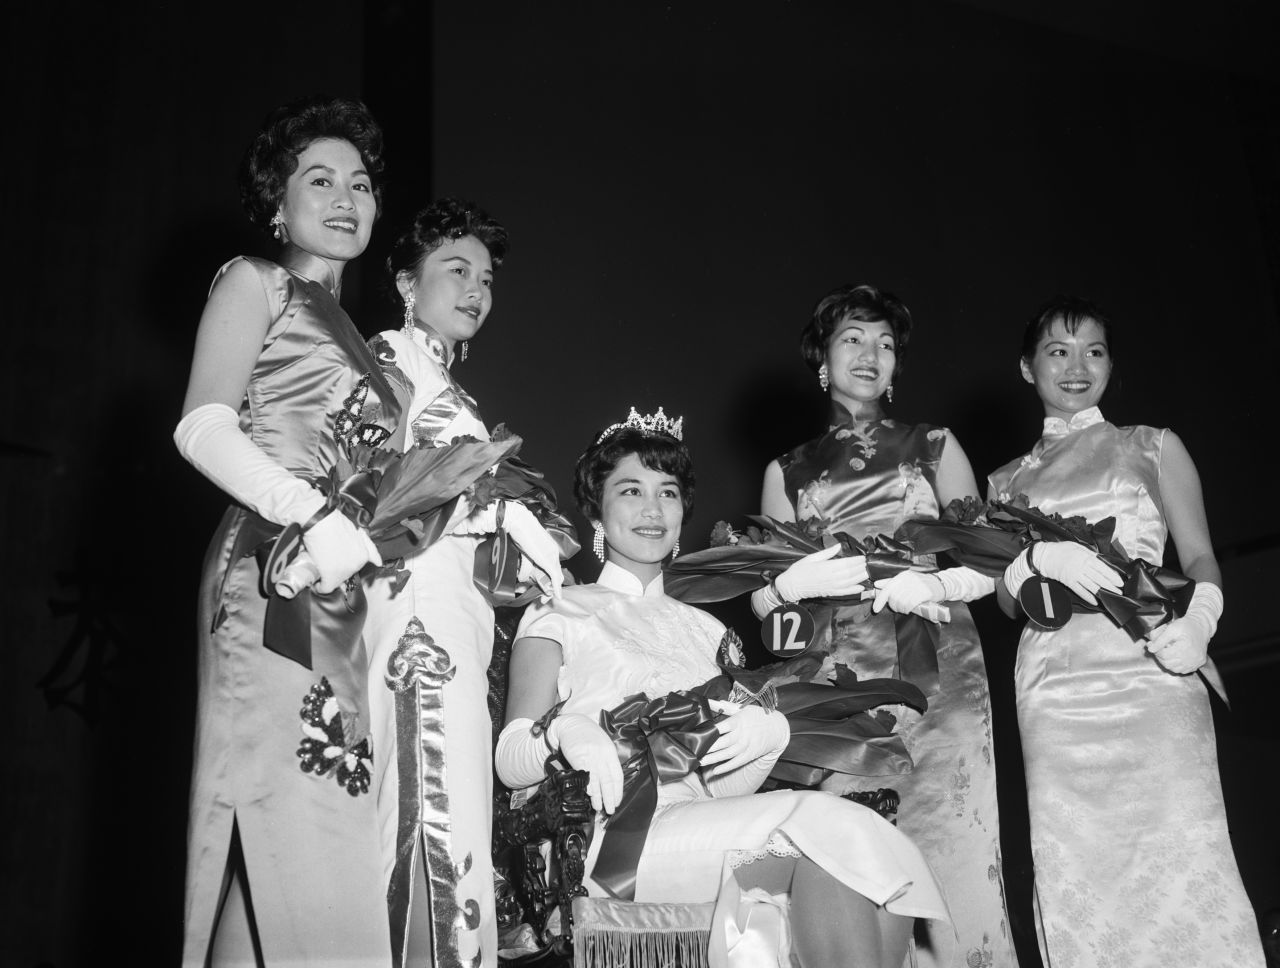 Four runner-ups stand around Carol Ng, winner of the Miss Chinatown USA pageant of 1960.